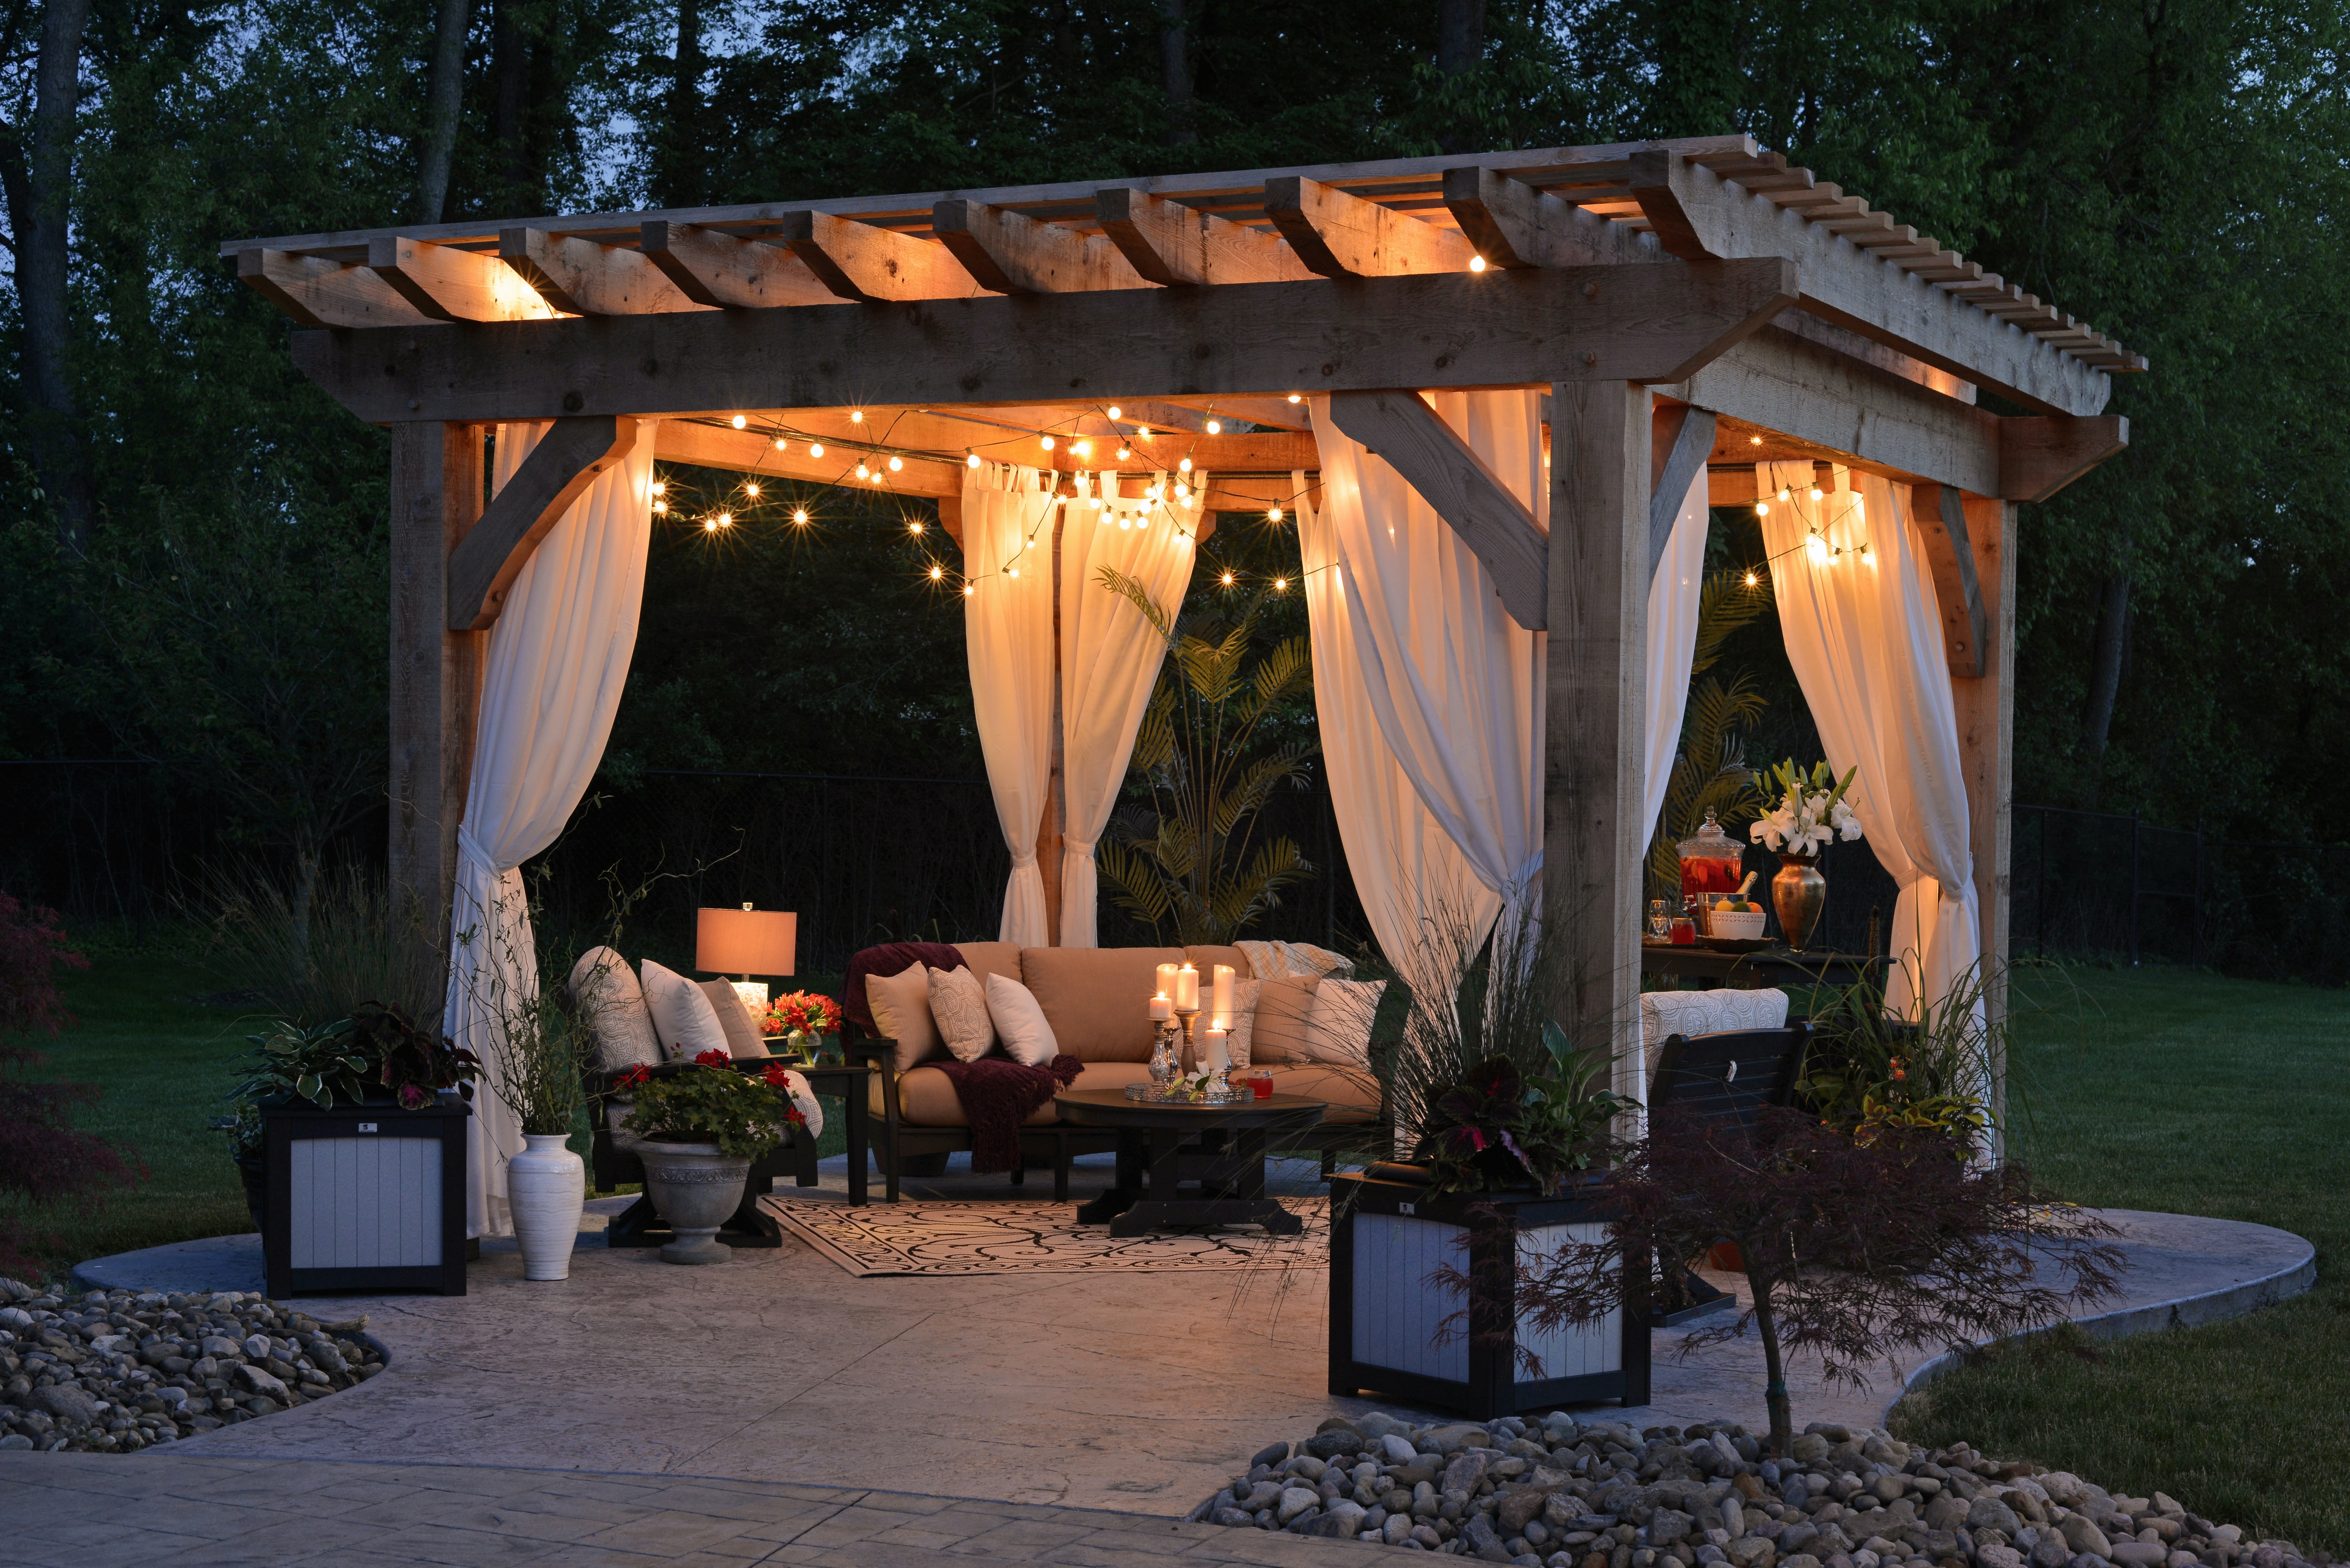 How To Create An Outdoor Living Area On A Budget